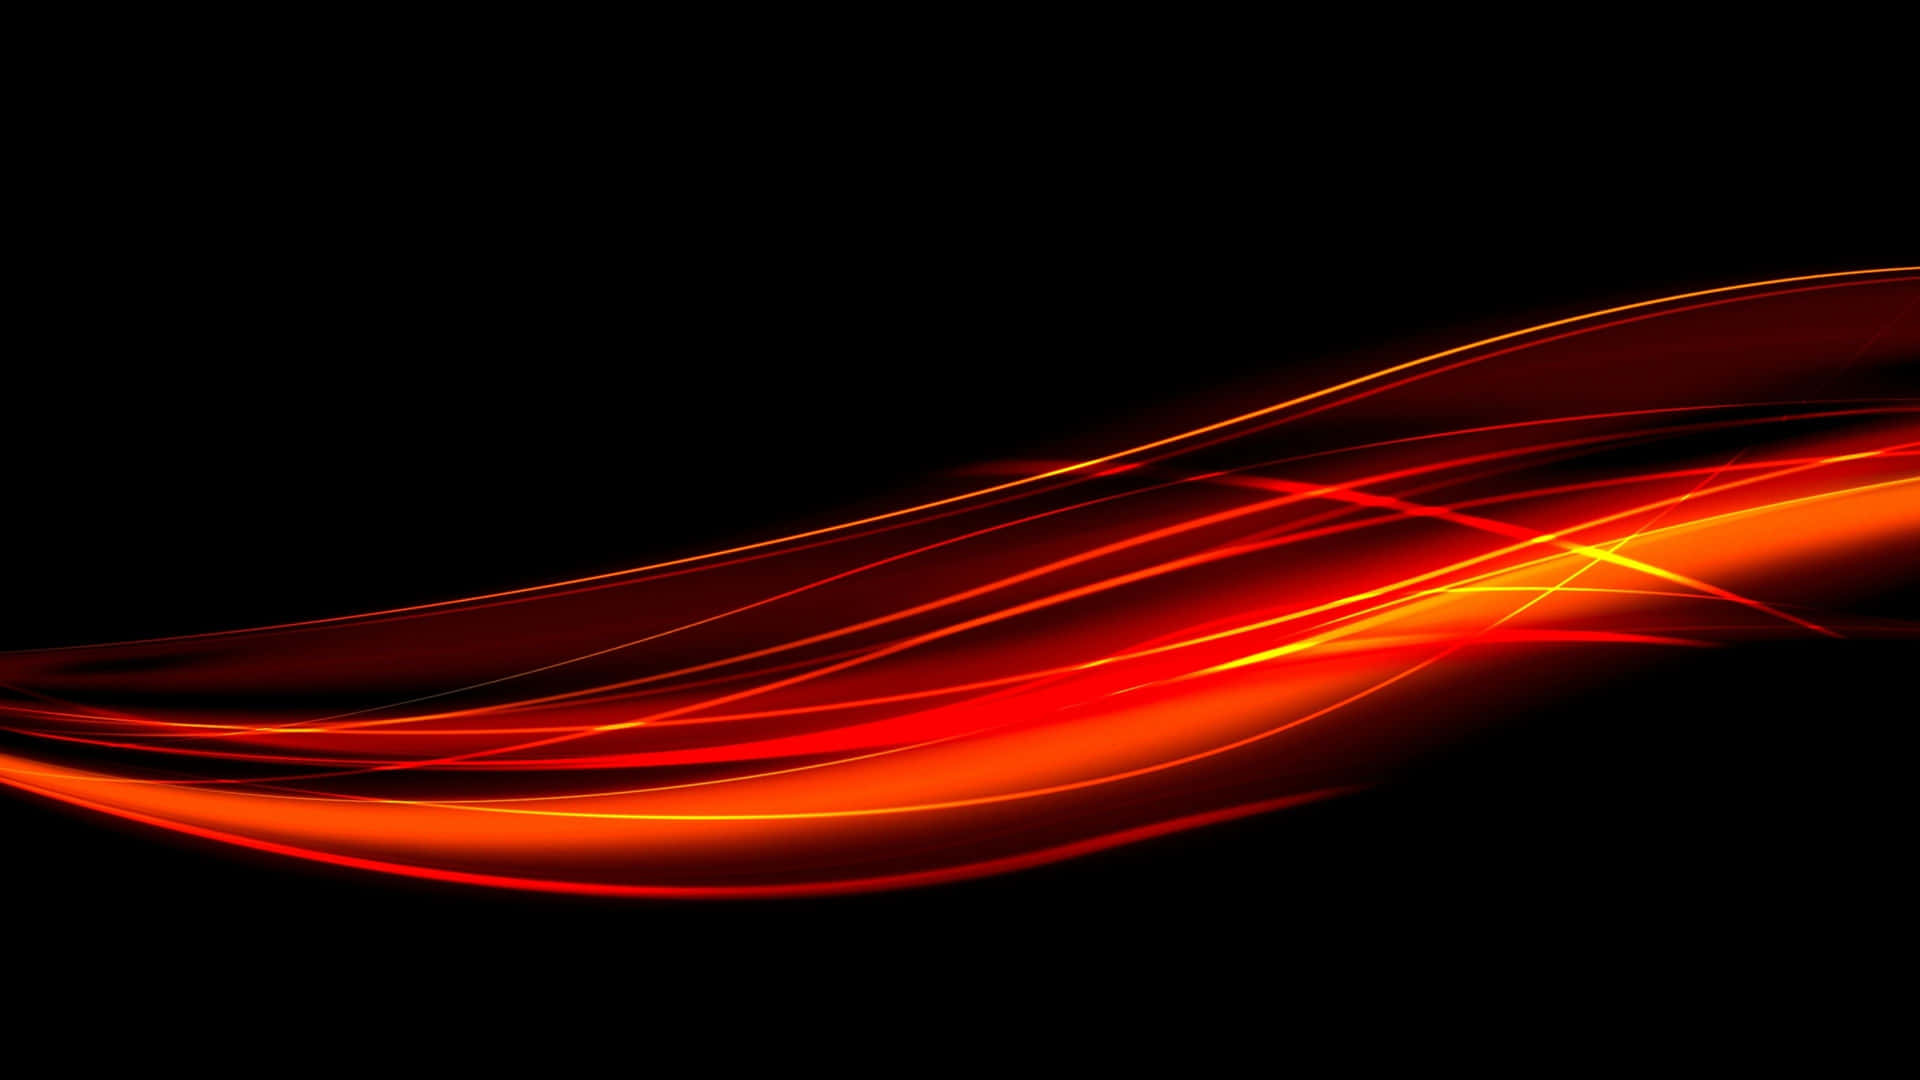 A Black Background With Orange And Red Waves Wallpaper